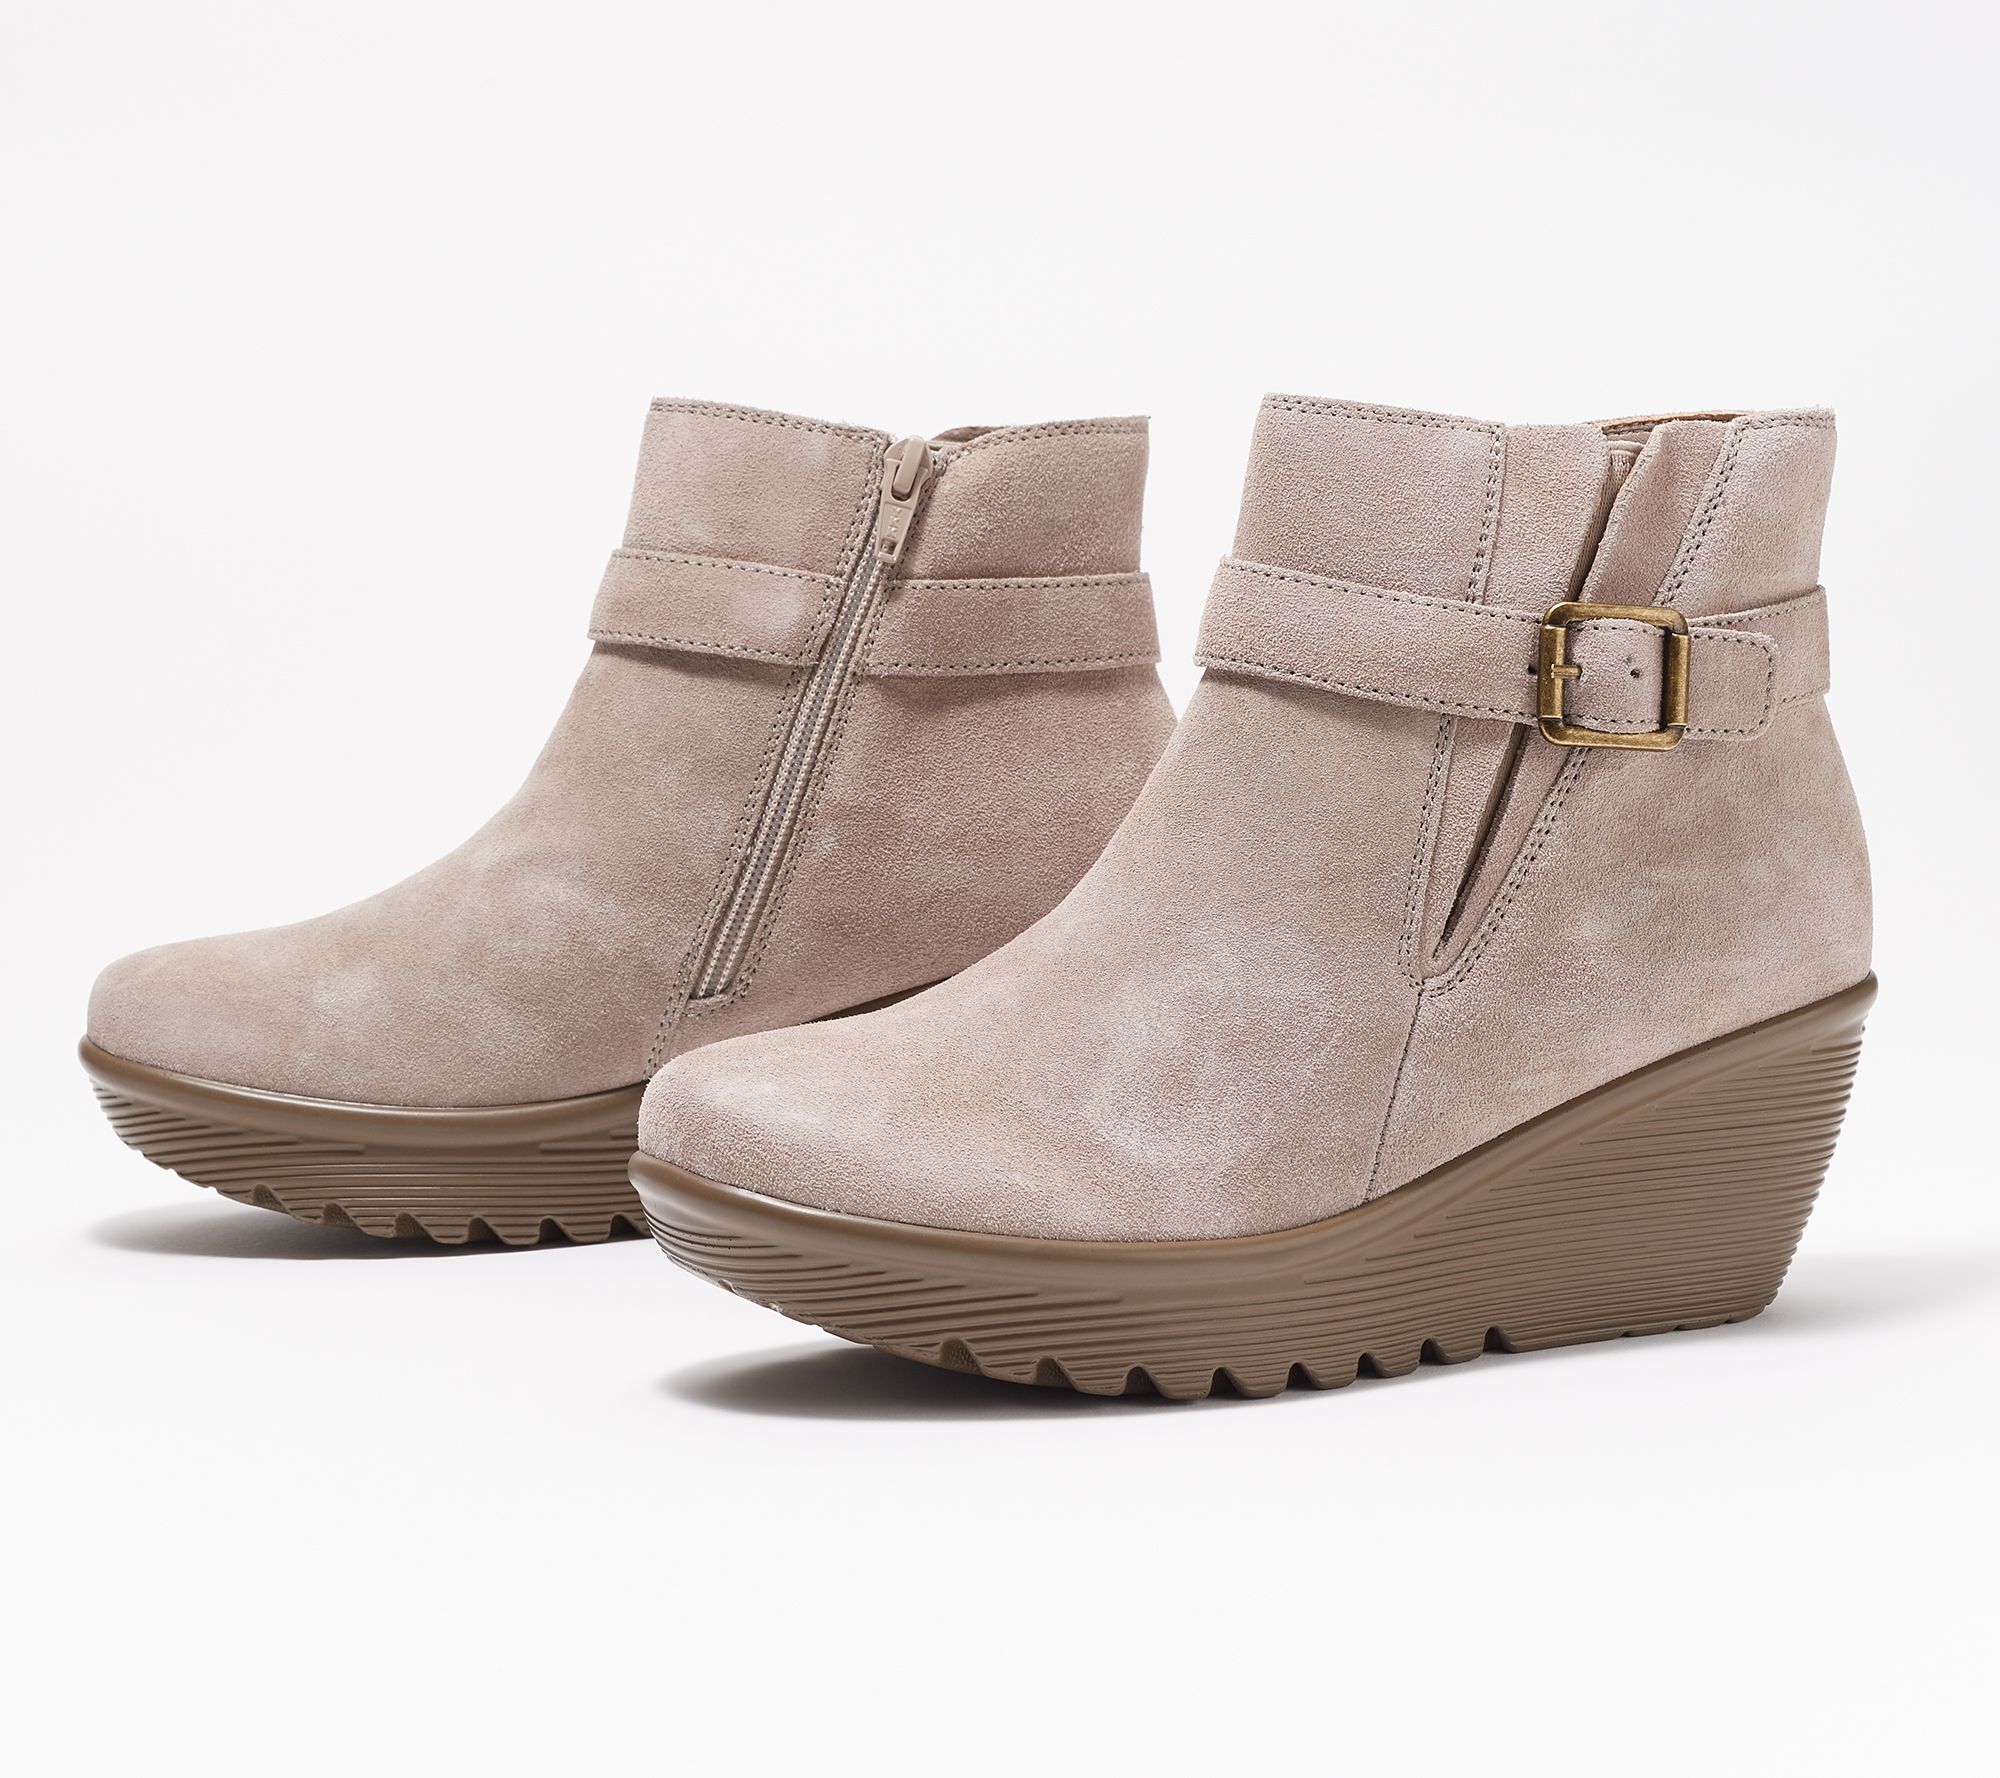 Natur halt lærer As Is" Skechers Suede Parallel Wedge Ankle Boots - Day Date - QVC.com